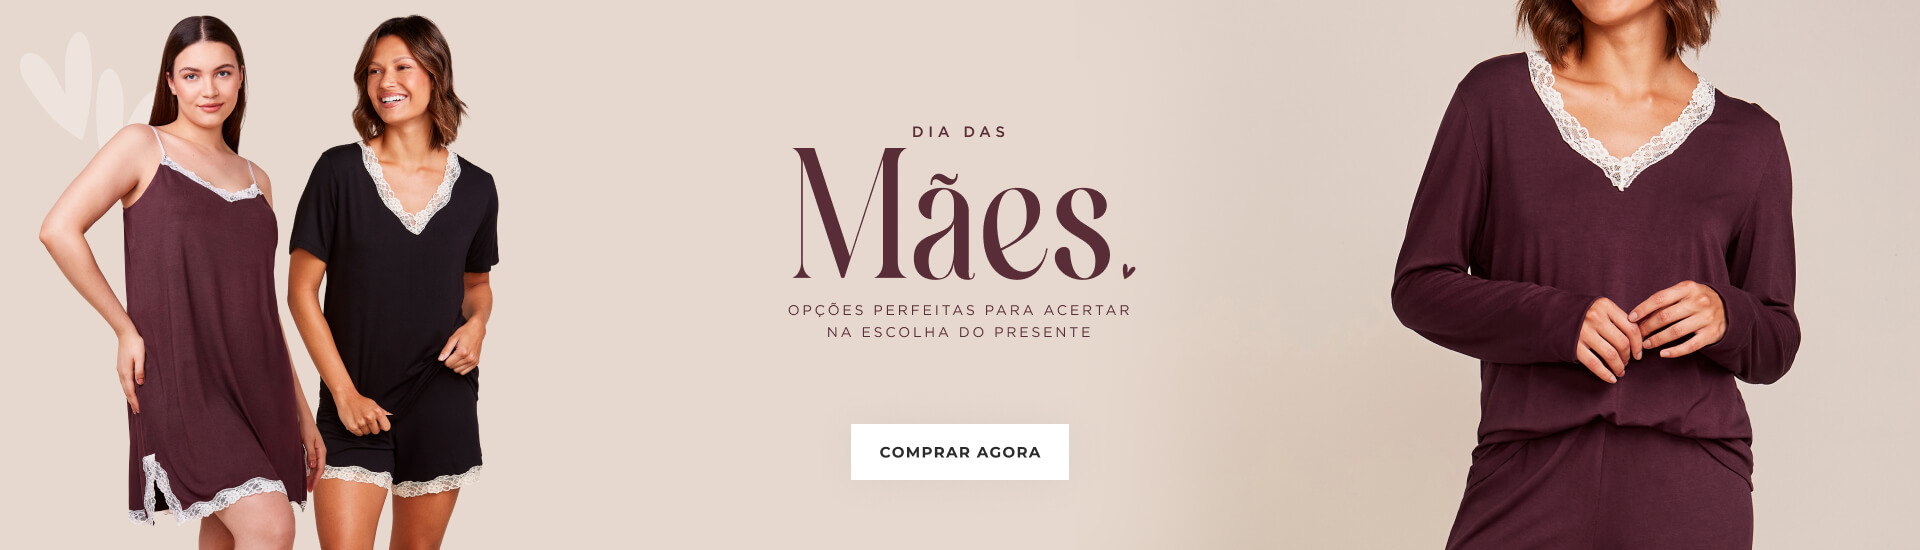 MAES